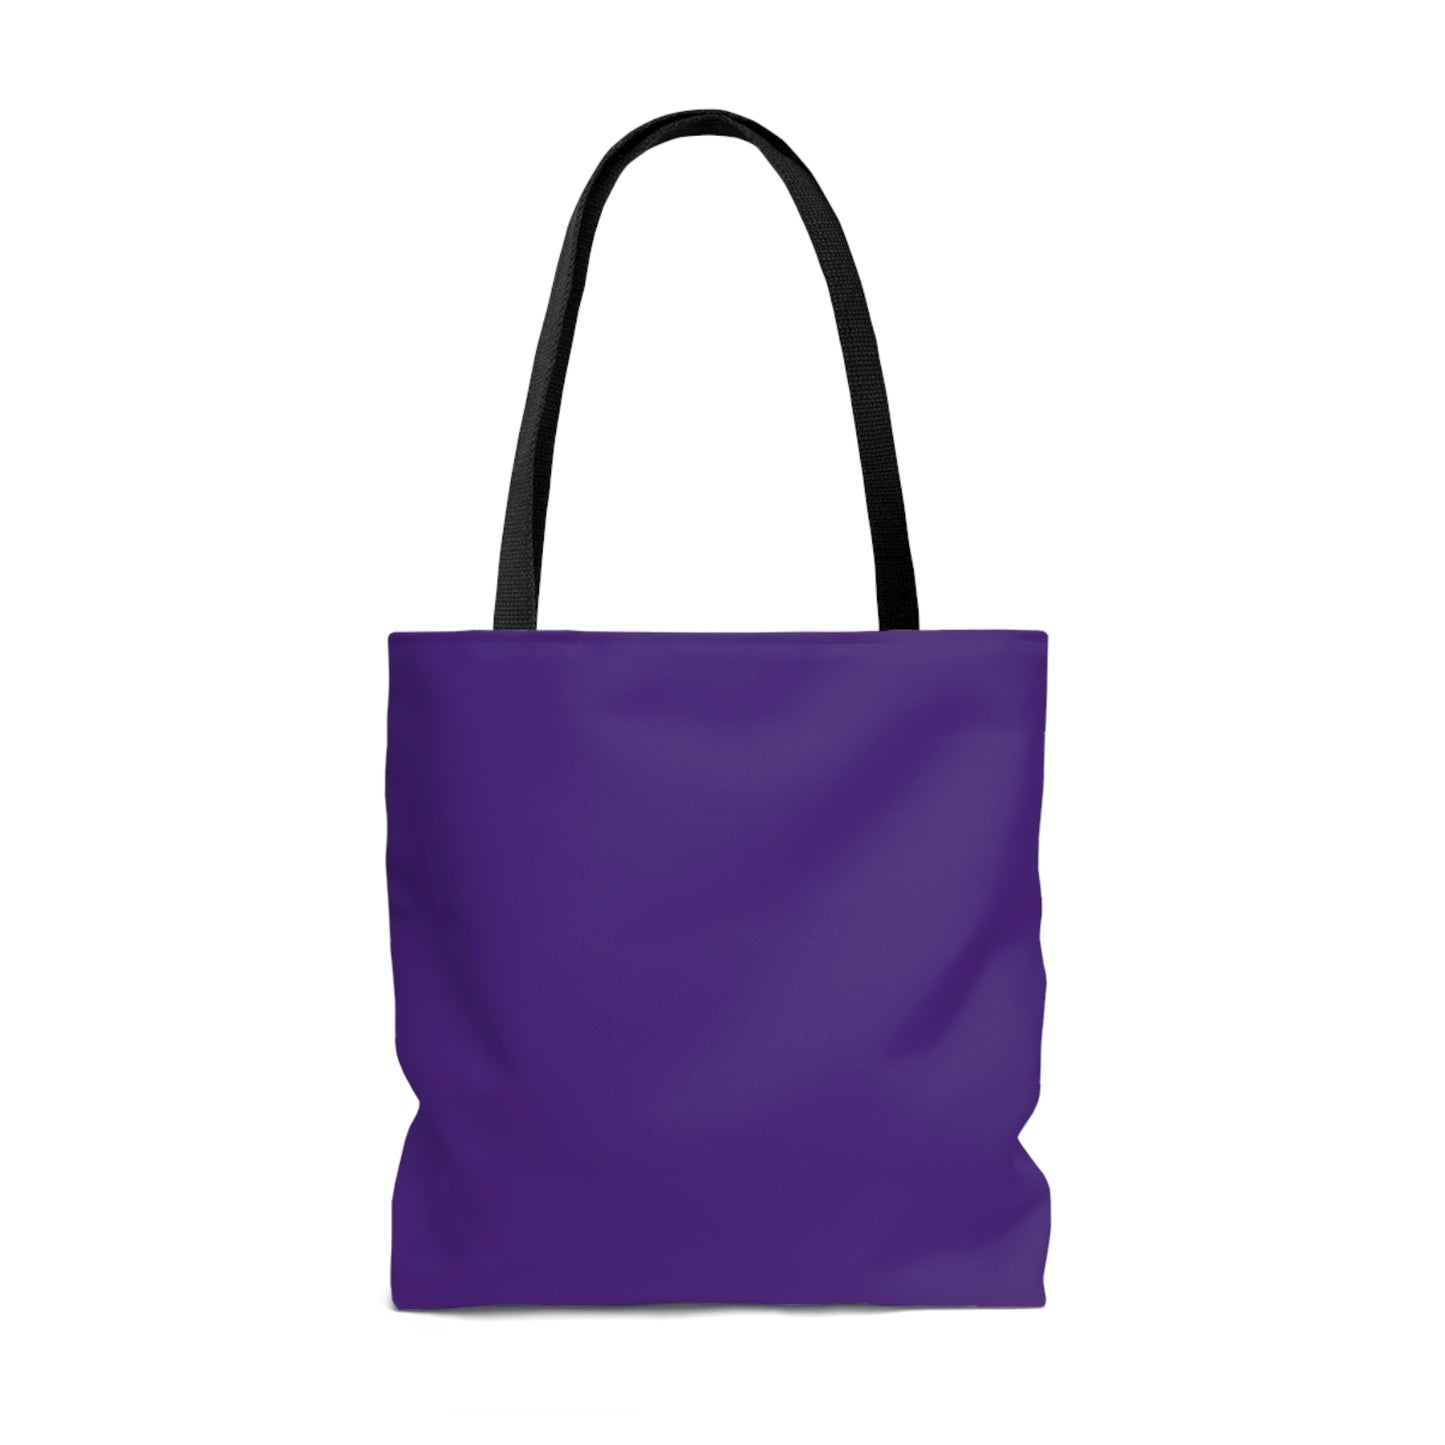 Condemned by Sin Freed By The Cross Tote Bag